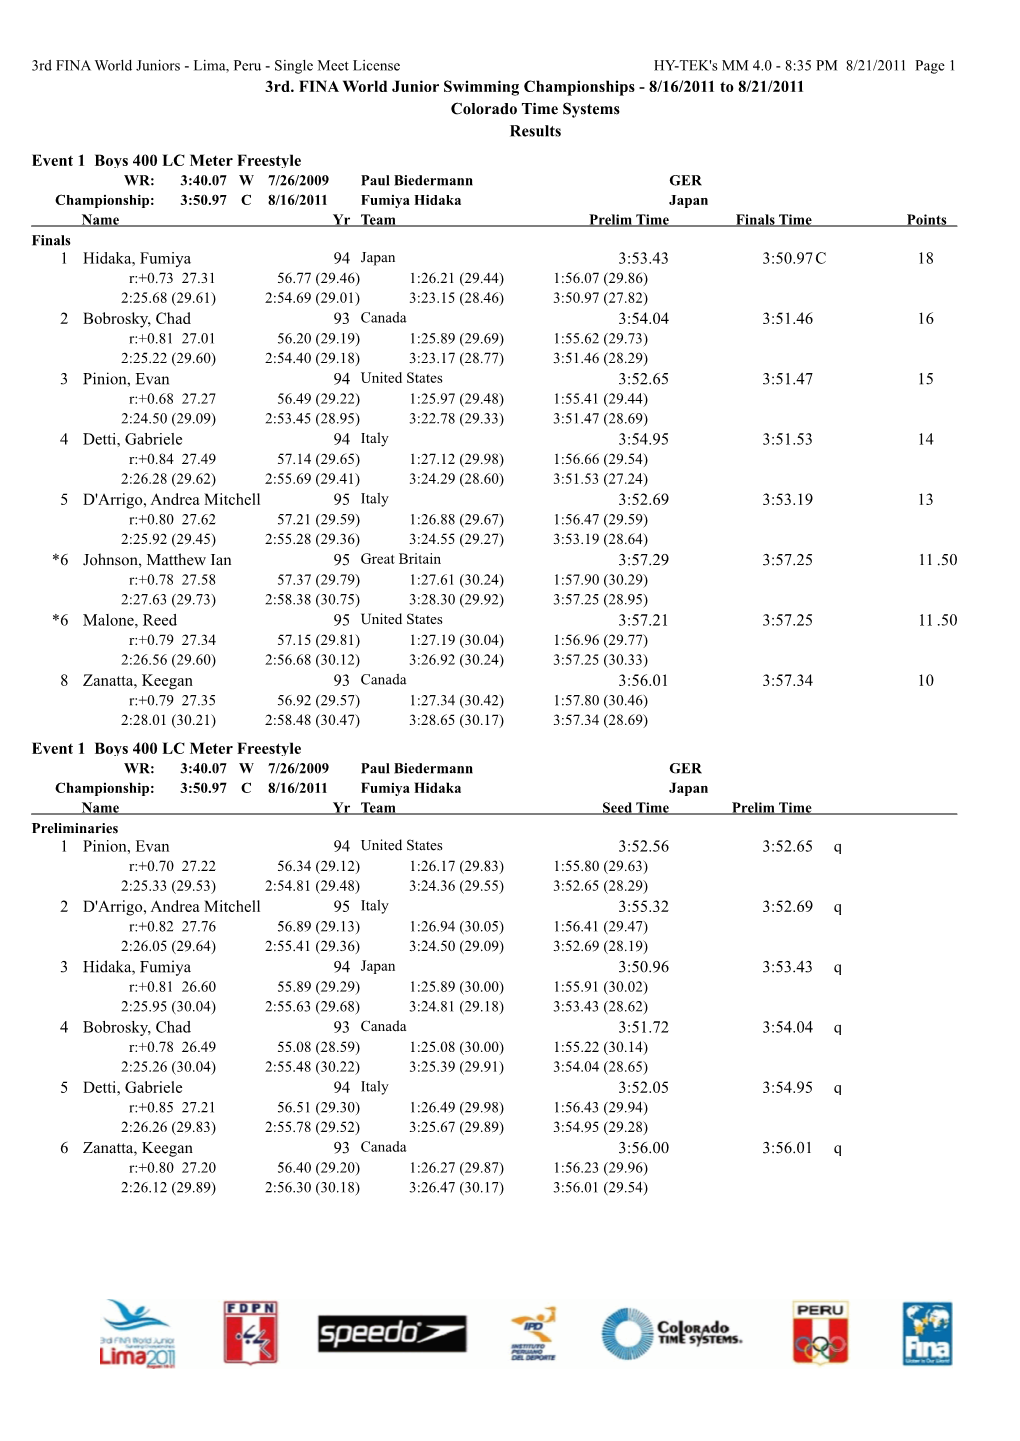 3Rd. FINA World Junior Swimming Championships - 8/16/2011 to 8/21/2011 Colorado Time Systems Results